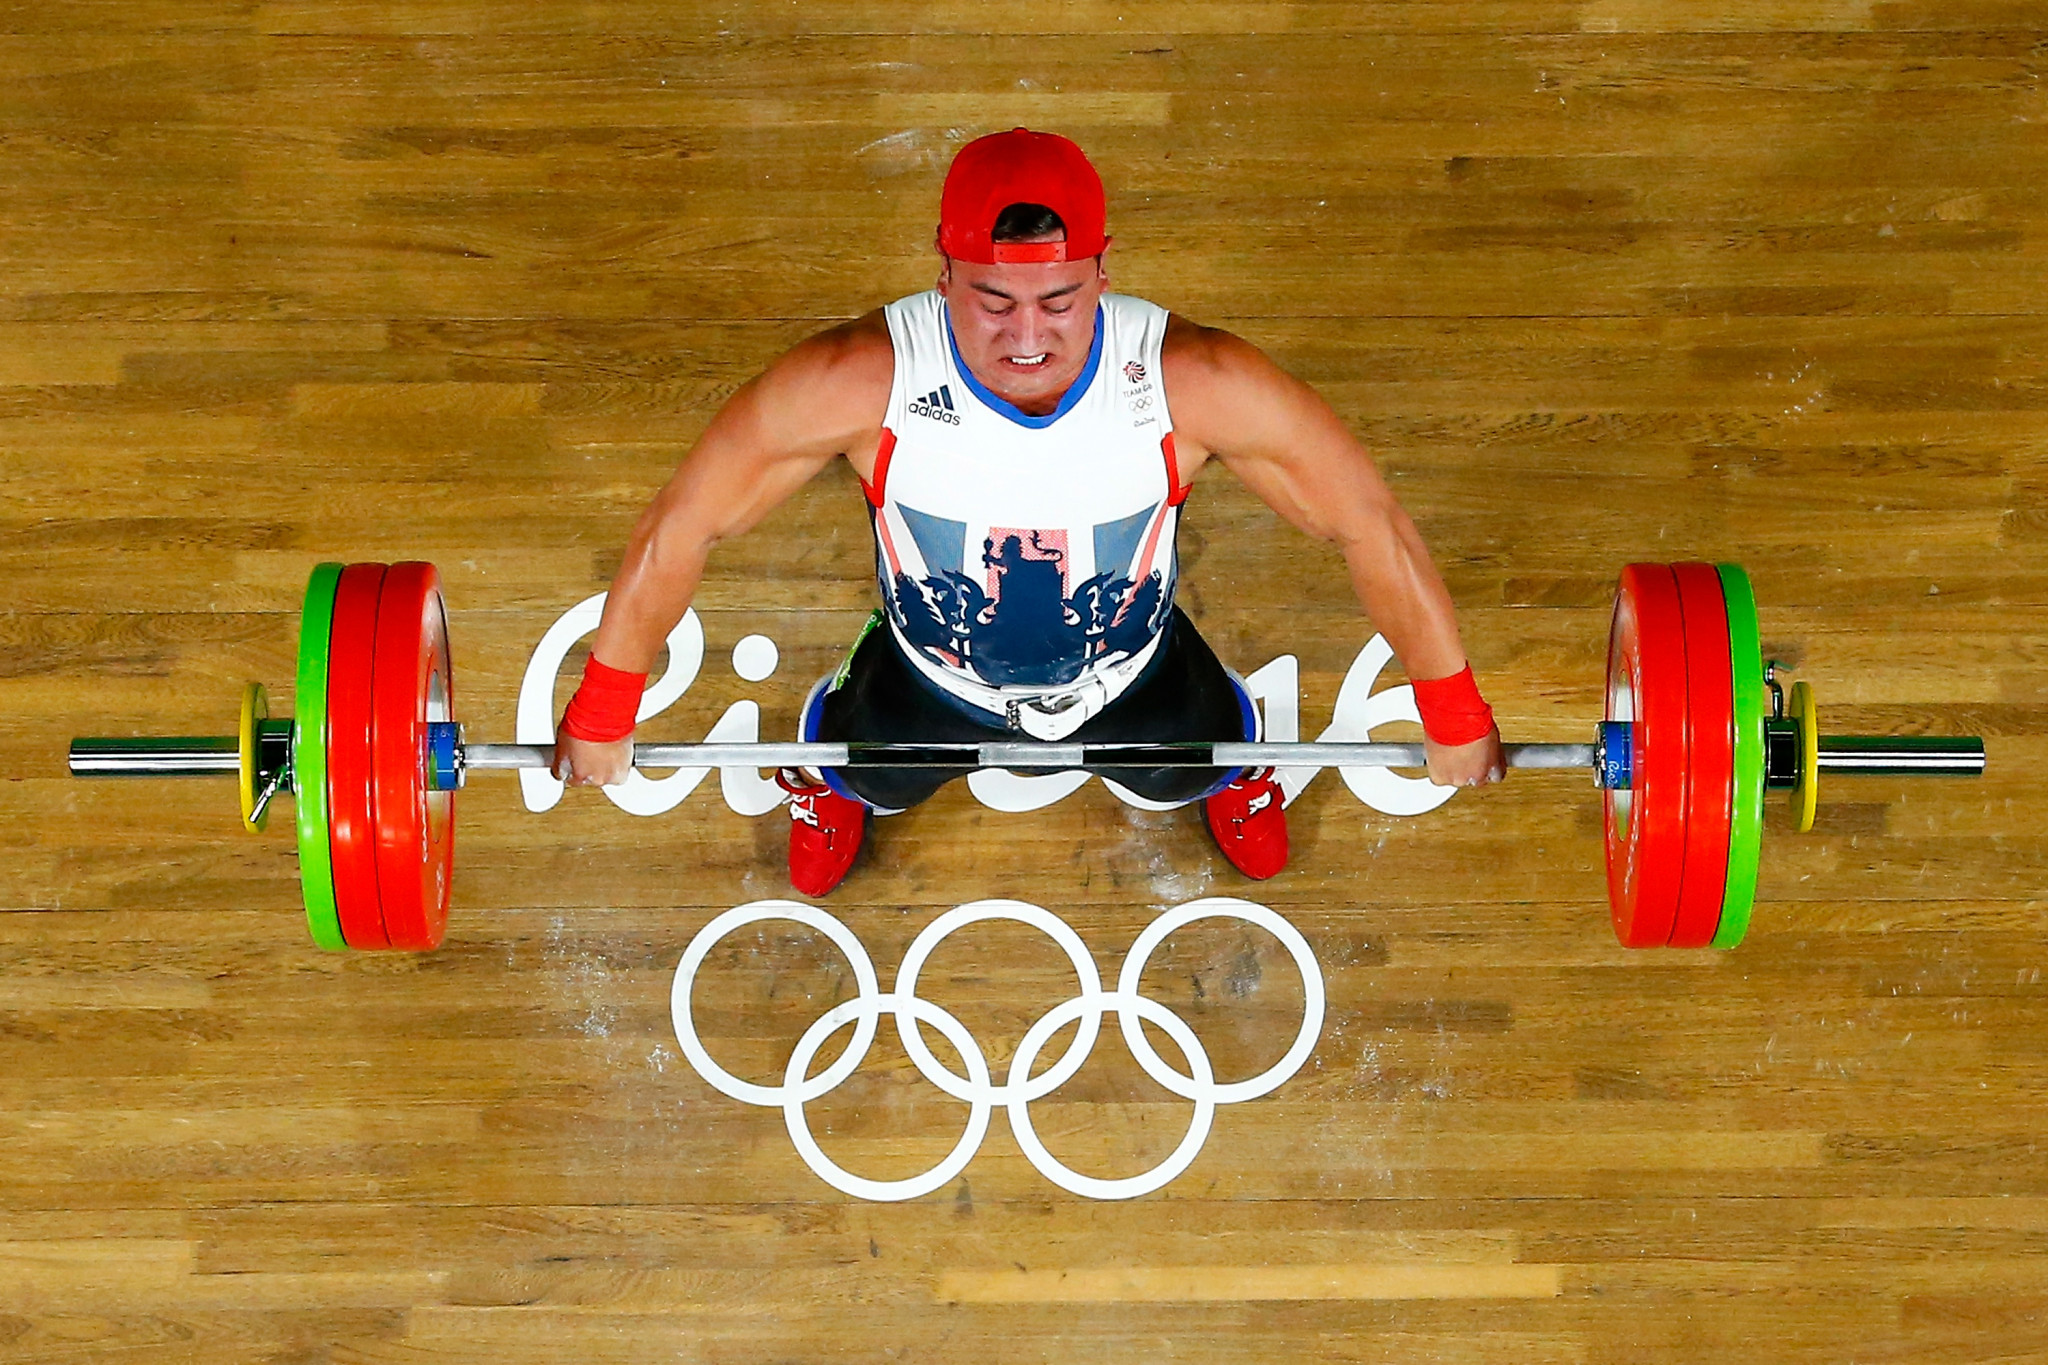 Sonny Webster finished 14th at the Rio 2016 Olympic Games in the men's 94kg event ©Getty Images